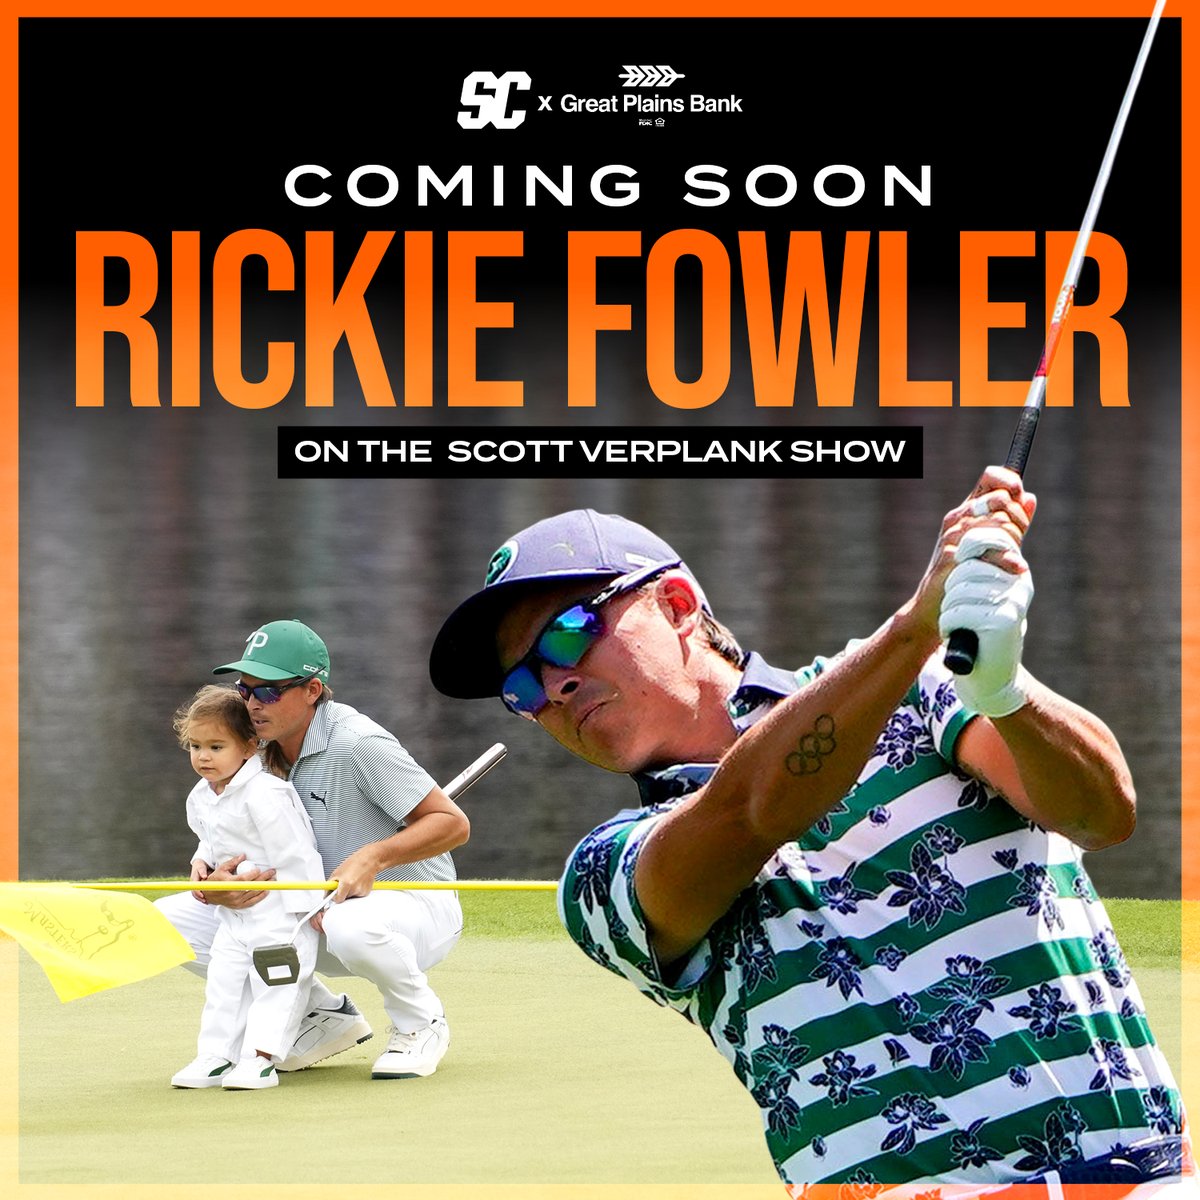 Can't wait to share my conversation with @RickieFowler. Presented by @GreatPlainsBank. @selloutcrowd_